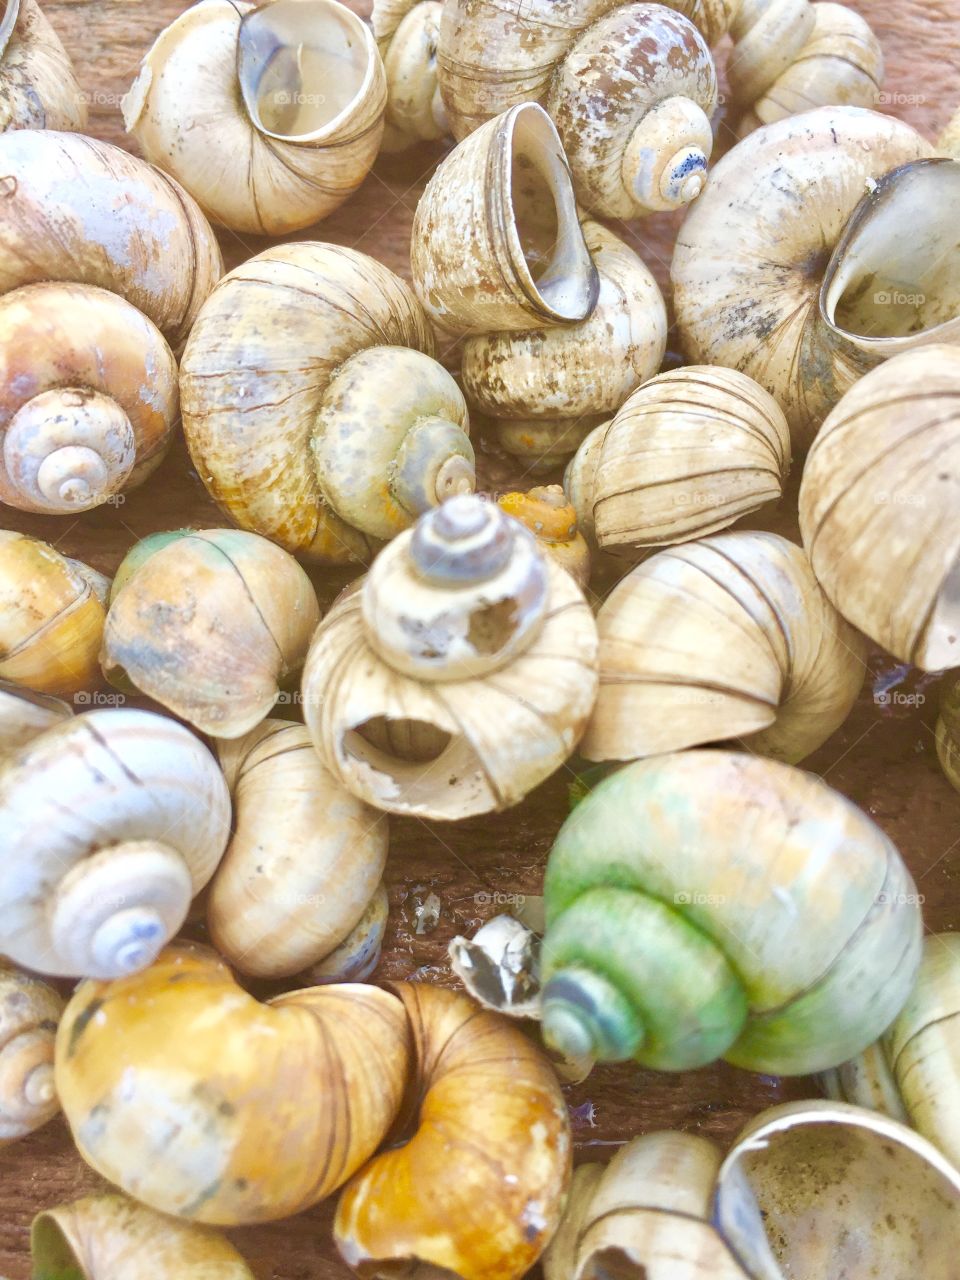 Shells from the Great Lakes